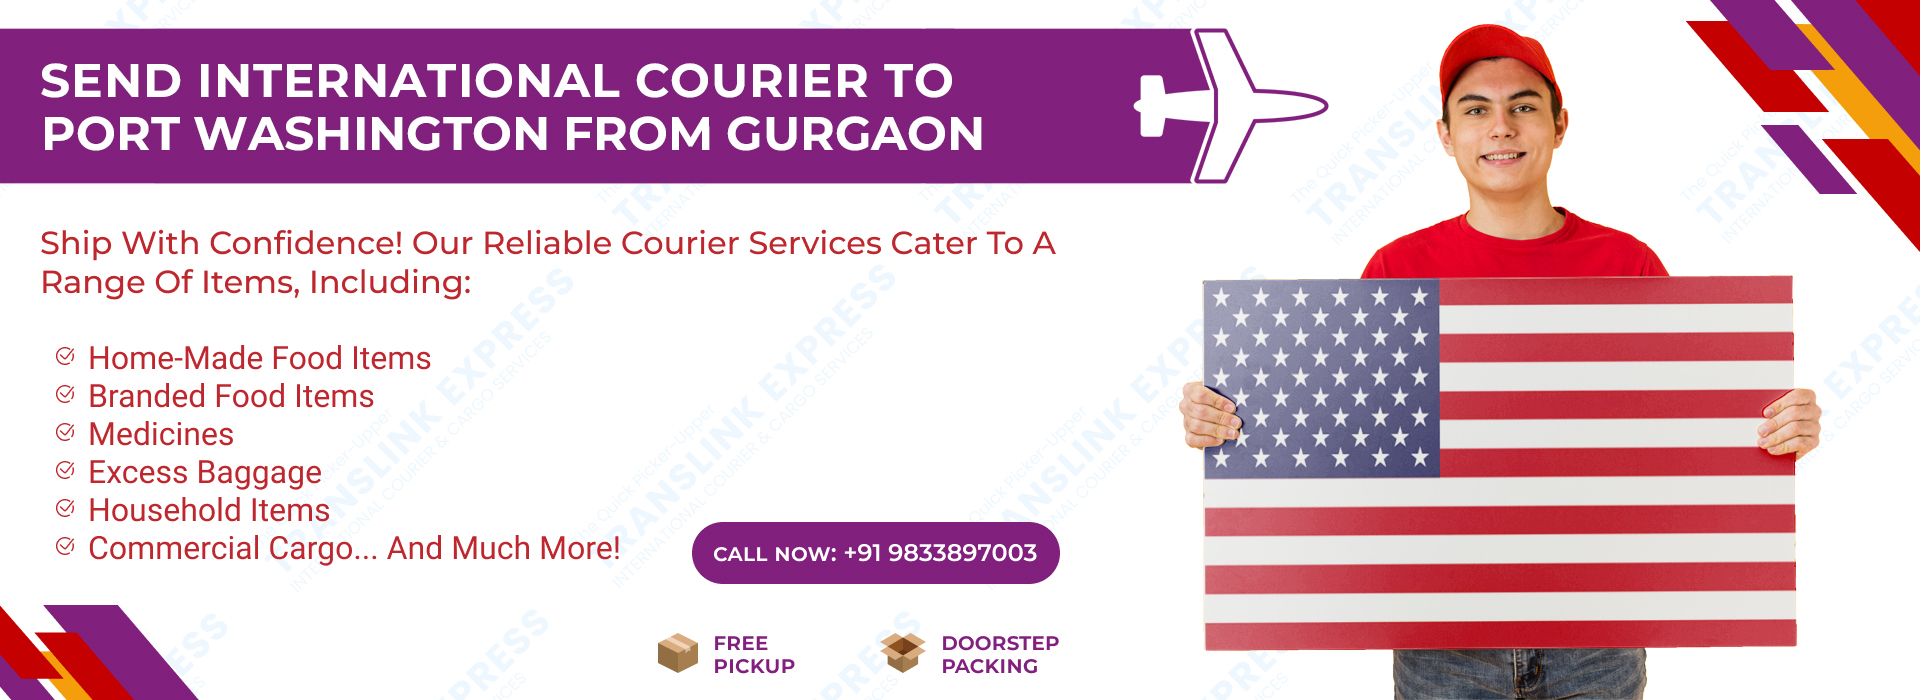 Courier to Port Washington From Gurgaon